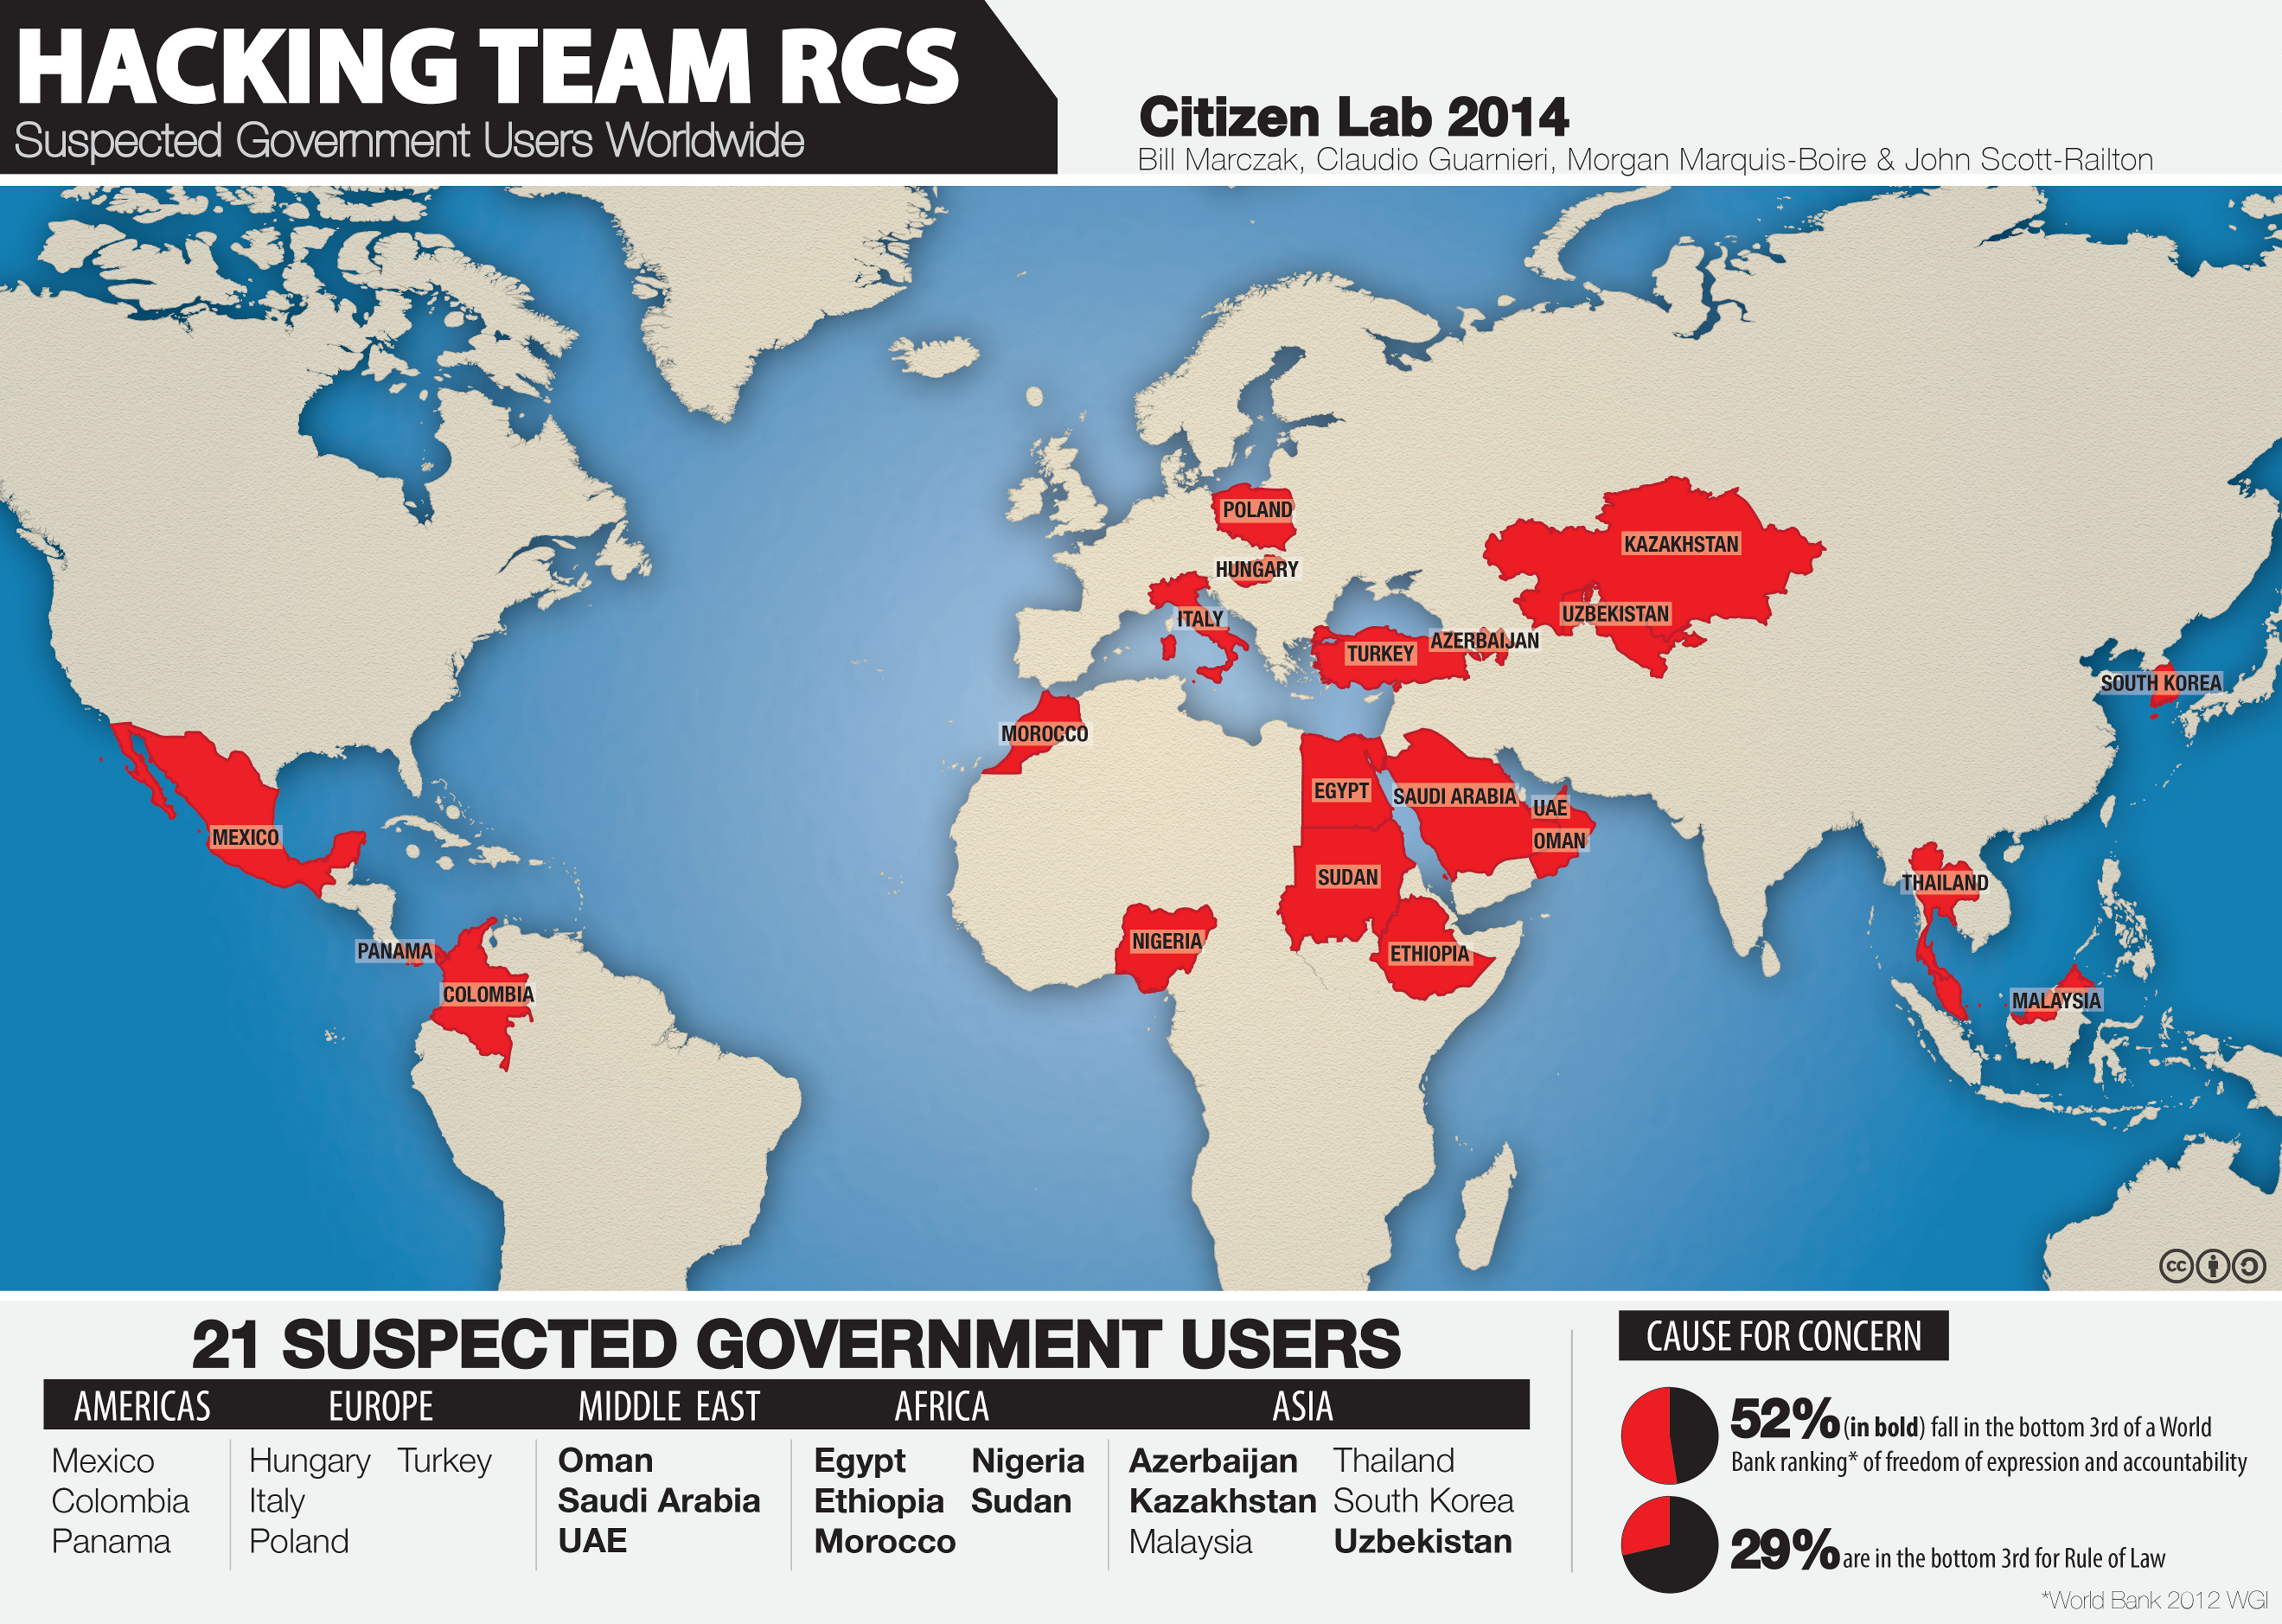 The Hacking Team's alleged clients countries.